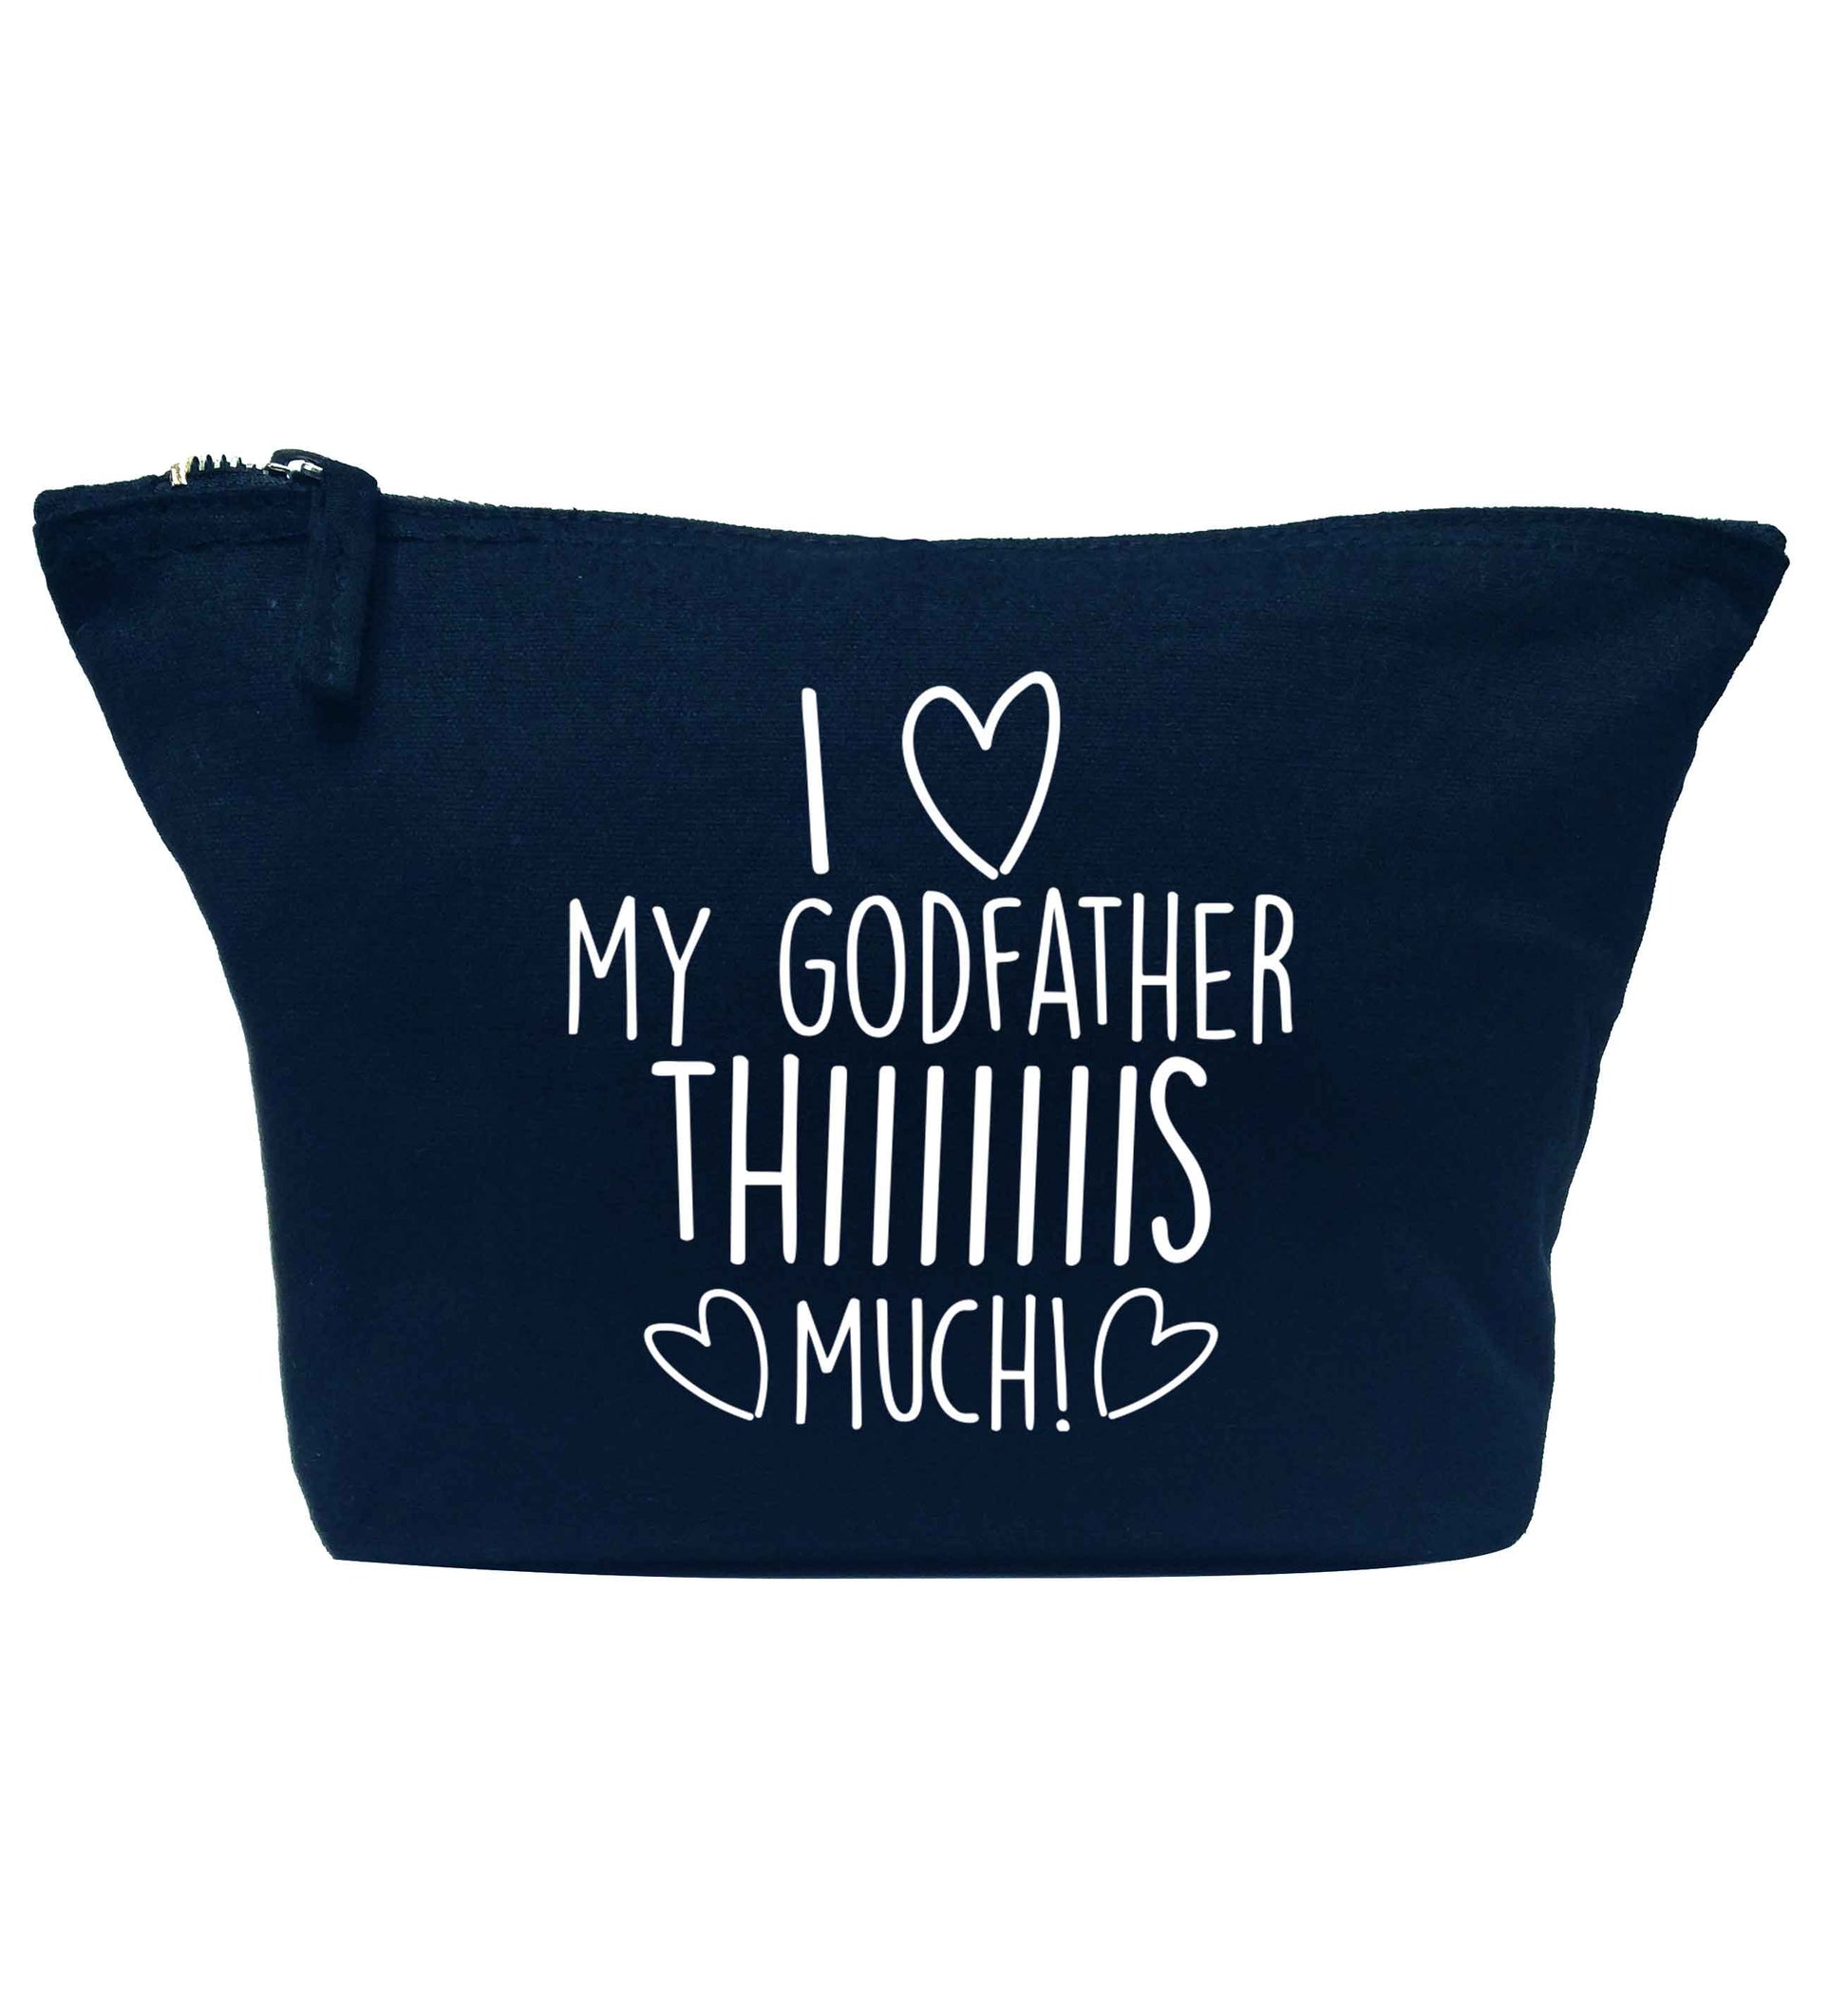 I love my Godfather this much navy makeup bag